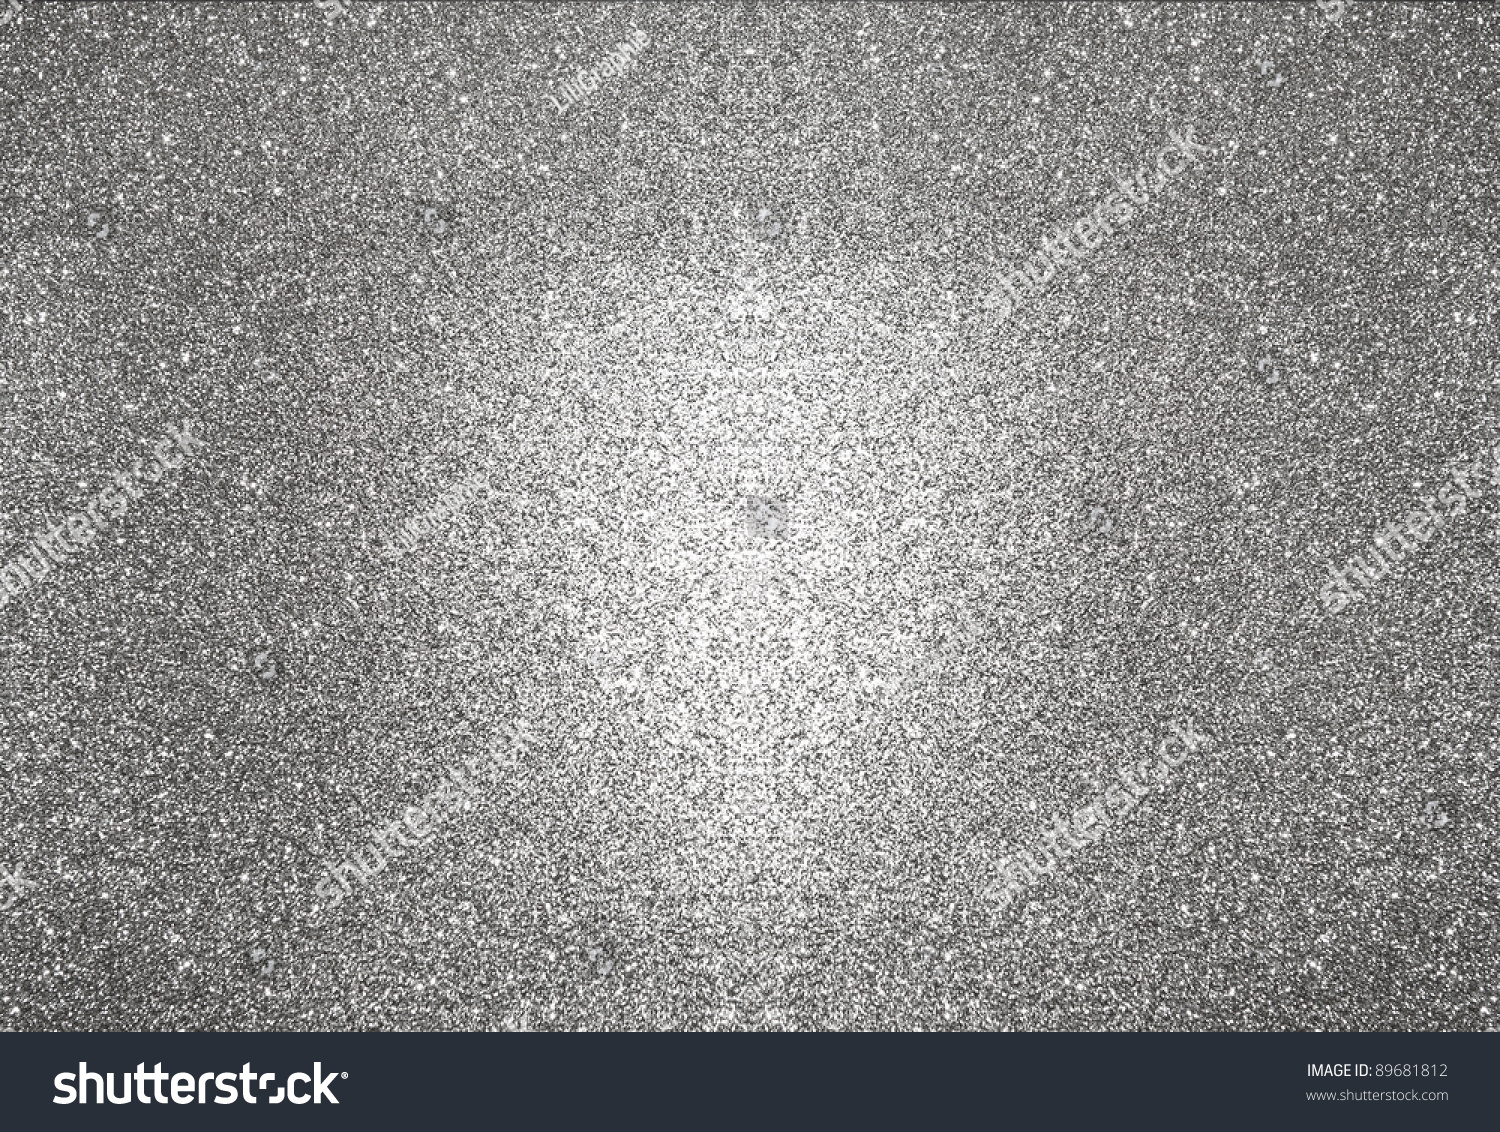 Abstract Silver Background Glitter Sparkles Stock Photo 89681812